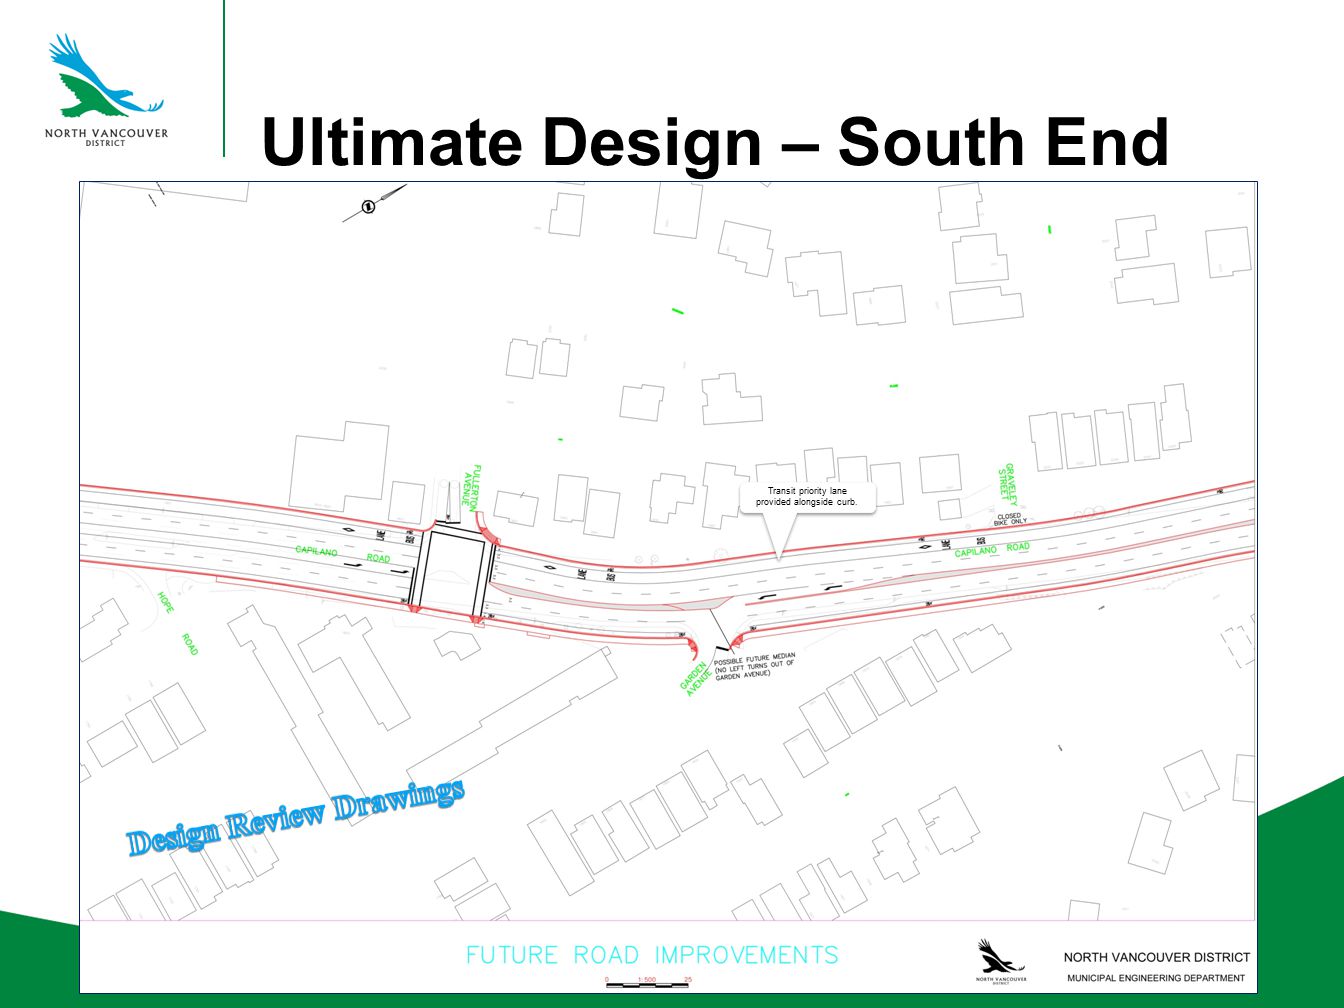 Ultimate Design – South End North Vancouver Hotel Transit priority lane provided alongside curb.